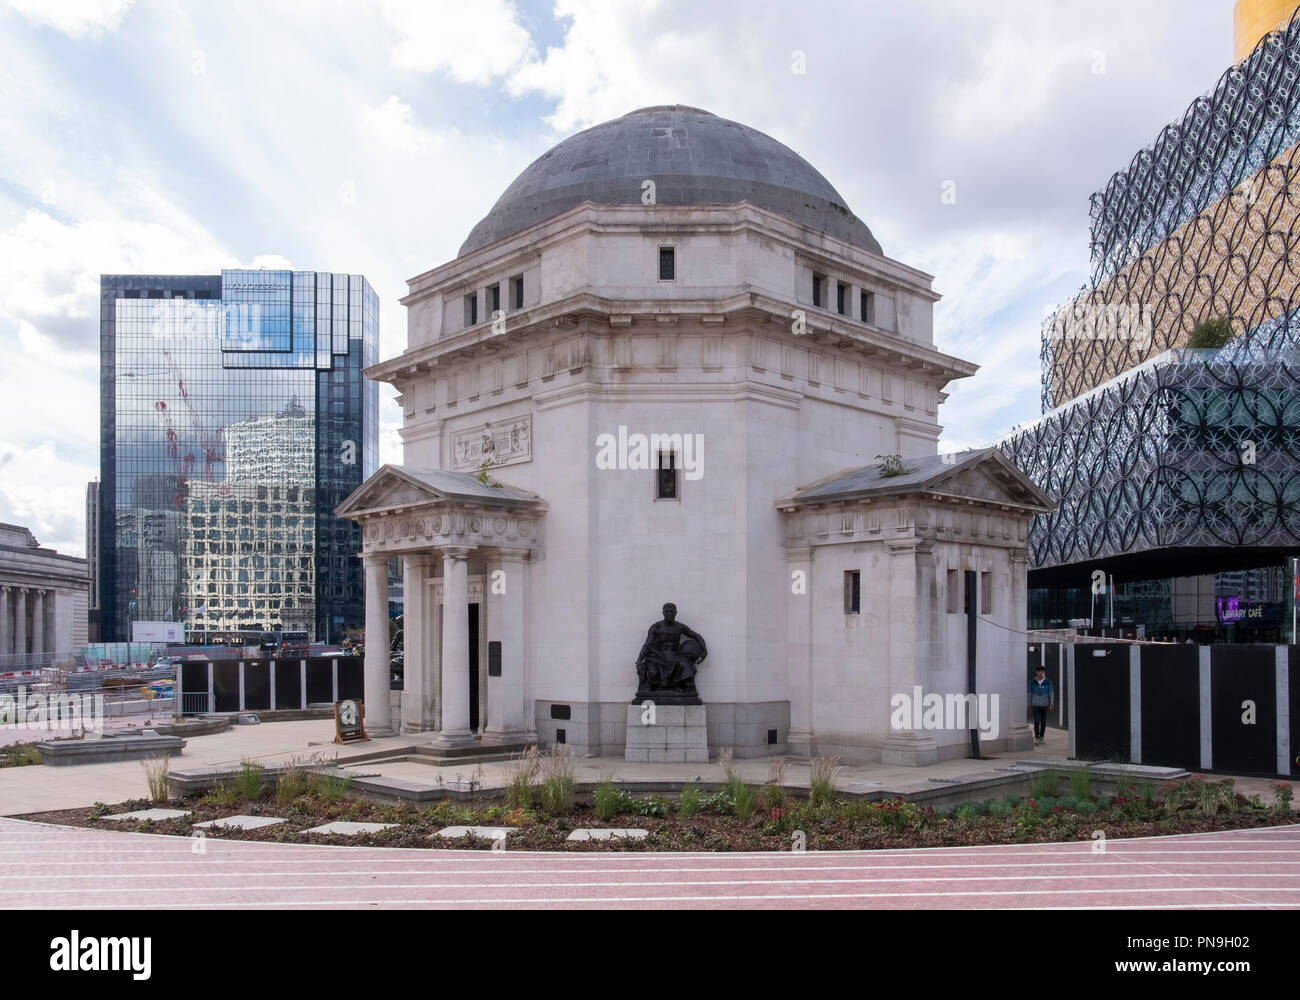 The Hall of Memory in Centenary Square, Birmingham, with the ew library and Hyatt hotel. Stock Photo